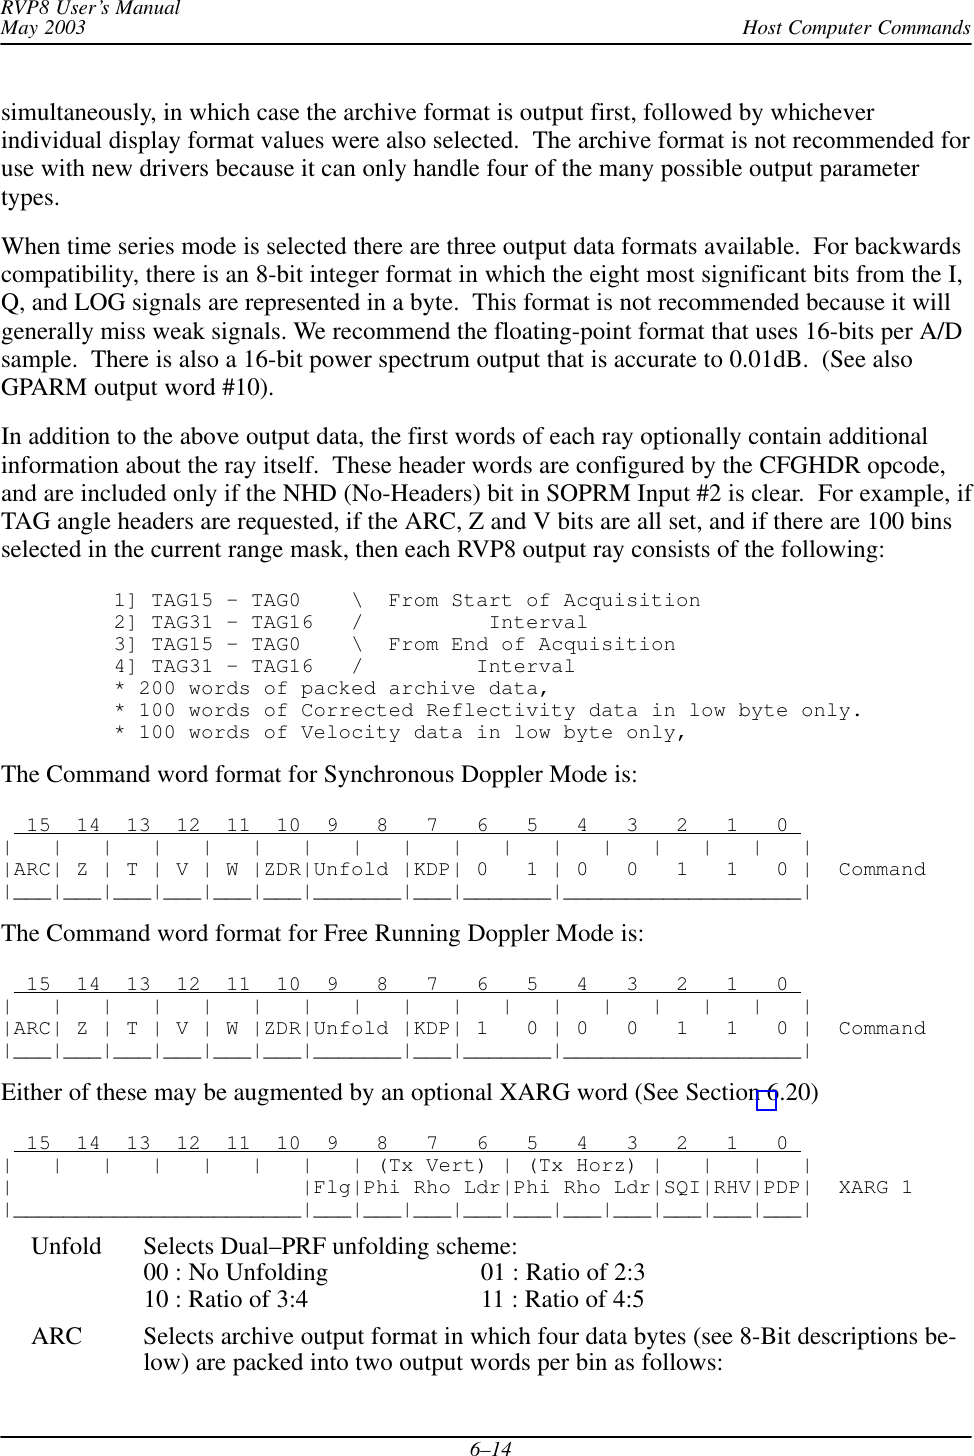 Host Computer CommandsRVP8 User’s ManualMay 20036–14simultaneously, in which case the archive format is output first, followed by whicheverindividual display format values were also selected.  The archive format is not recommended foruse with new drivers because it can only handle four of the many possible output parametertypes.When time series mode is selected there are three output data formats available.  For backwardscompatibility, there is an 8-bit integer format in which the eight most significant bits from the I,Q, and LOG signals are represented in a byte.  This format is not recommended because it willgenerally miss weak signals. We recommend the floating-point format that uses 16-bits per A/Dsample.  There is also a 16-bit power spectrum output that is accurate to 0.01dB.  (See alsoGPARM output word #10).In addition to the above output data, the first words of each ray optionally contain additionalinformation about the ray itself.  These header words are configured by the CFGHDR opcode,and are included only if the NHD (No-Headers) bit in SOPRM Input #2 is clear.  For example, ifTAG angle headers are requested, if the ARC, Z and V bits are all set, and if there are 100 binsselected in the current range mask, then each RVP8 output ray consists of the following:1] TAG15 – TAG0    \  From Start of Acquisition2] TAG31 – TAG16   /          Interval3] TAG15 – TAG0    \  From End of Acquisition4] TAG31 – TAG16   /         Interval* 200 words of packed archive data,* 100 words of Corrected Reflectivity data in low byte only.* 100 words of Velocity data in low byte only,The Command word format for Synchronous Doppler Mode is:  15  14  13  12  11  10  9   8   7   6   5   4   3   2   1   0 |   |   |   |   |   |   |   |   |   |   |   |   |   |   |   |   ||ARC| Z | T | V | W |ZDR|Unfold |KDP| 0   1 | 0   0   1   1   0 |  Command|___|___|___|___|___|___|_______|___|_______|___________________|The Command word format for Free Running Doppler Mode is:  15  14  13  12  11  10  9   8   7   6   5   4   3   2   1   0 |   |   |   |   |   |   |   |   |   |   |   |   |   |   |   |   ||ARC| Z | T | V | W |ZDR|Unfold |KDP| 1   0 | 0   0   1   1   0 |  Command|___|___|___|___|___|___|_______|___|_______|___________________|Either of these may be augmented by an optional XARG word (See Section 6.20)  15  14  13  12  11  10  9   8   7   6   5   4   3   2   1   0 |   |   |   |   |   |   |   | (Tx Vert) | (Tx Horz) |   |   |   ||                       |Flg|Phi Rho Ldr|Phi Rho Ldr|SQI|RHV|PDP|  XARG 1|_______________________|___|___|___|___|___|___|___|___|___|___|Unfold Selects Dual–PRF unfolding scheme:00 : No Unfolding 01 : Ratio of 2:310 : Ratio of 3:4 11 : Ratio of 4:5ARC Selects archive output format in which four data bytes (see 8-Bit descriptions be-low) are packed into two output words per bin as follows: